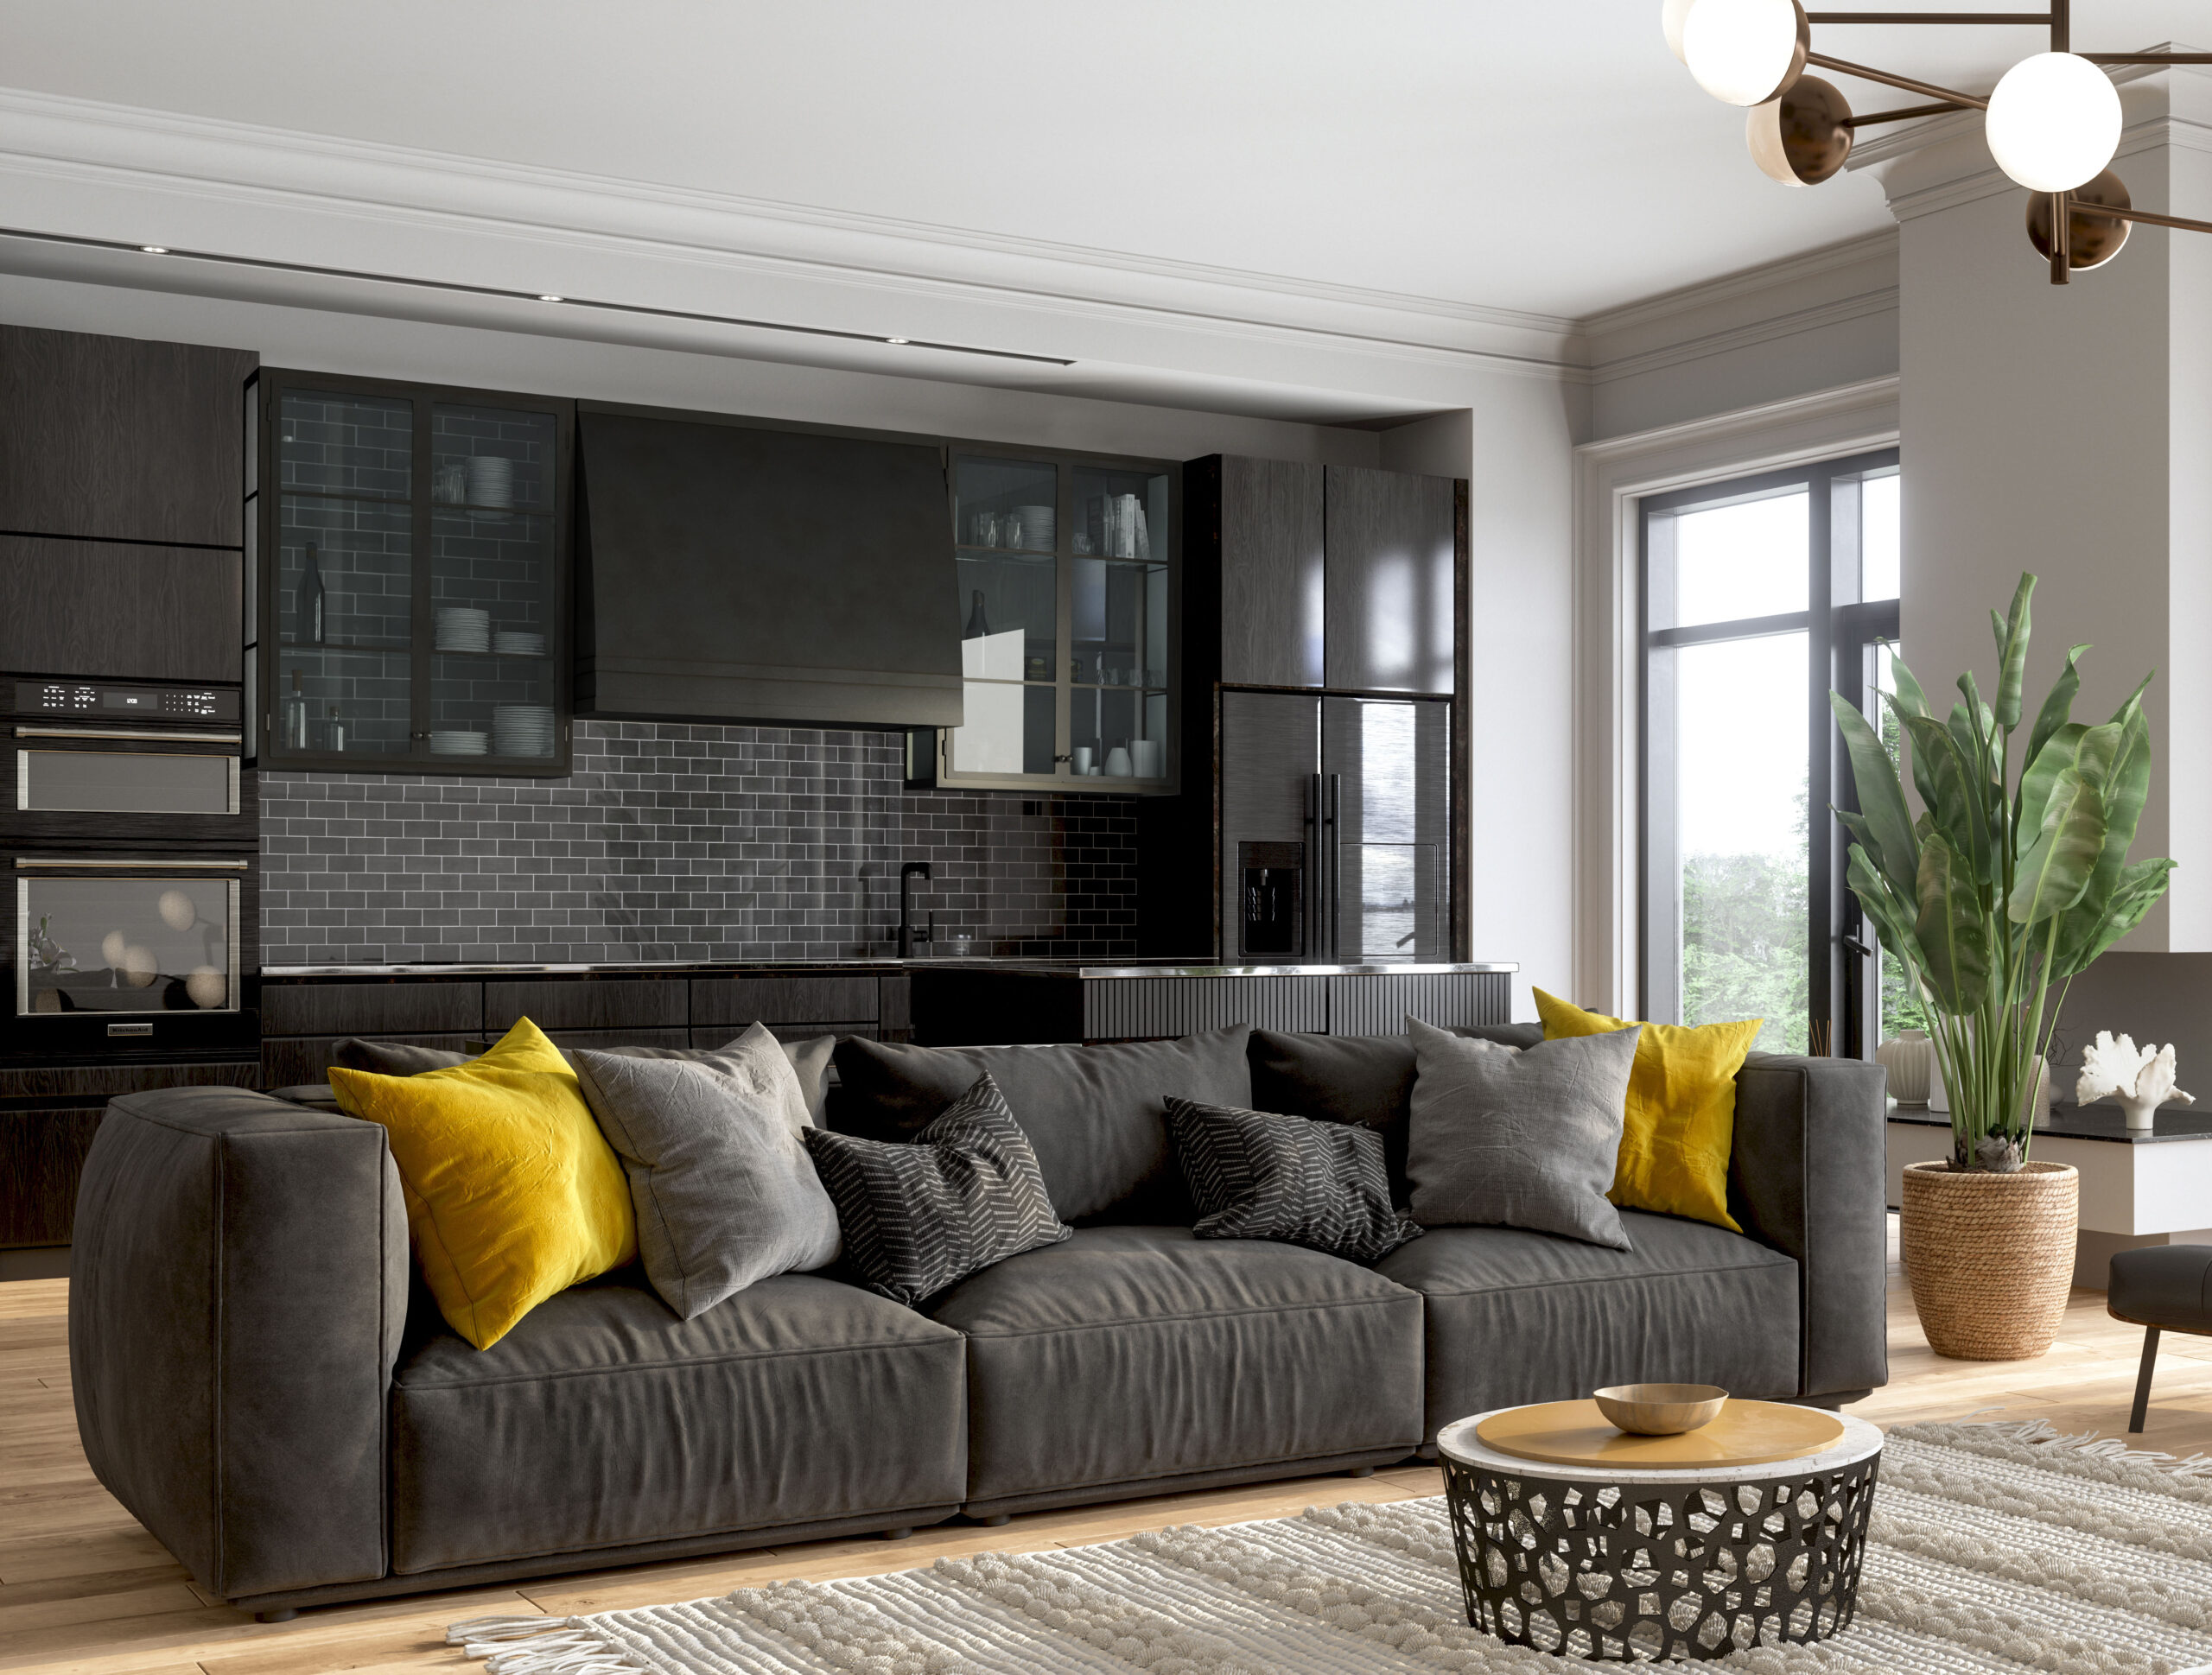 Interior Of Modern Living Room With Black Color Sofa, Armchairs, Potted Plant And Open Plan Kitchen.